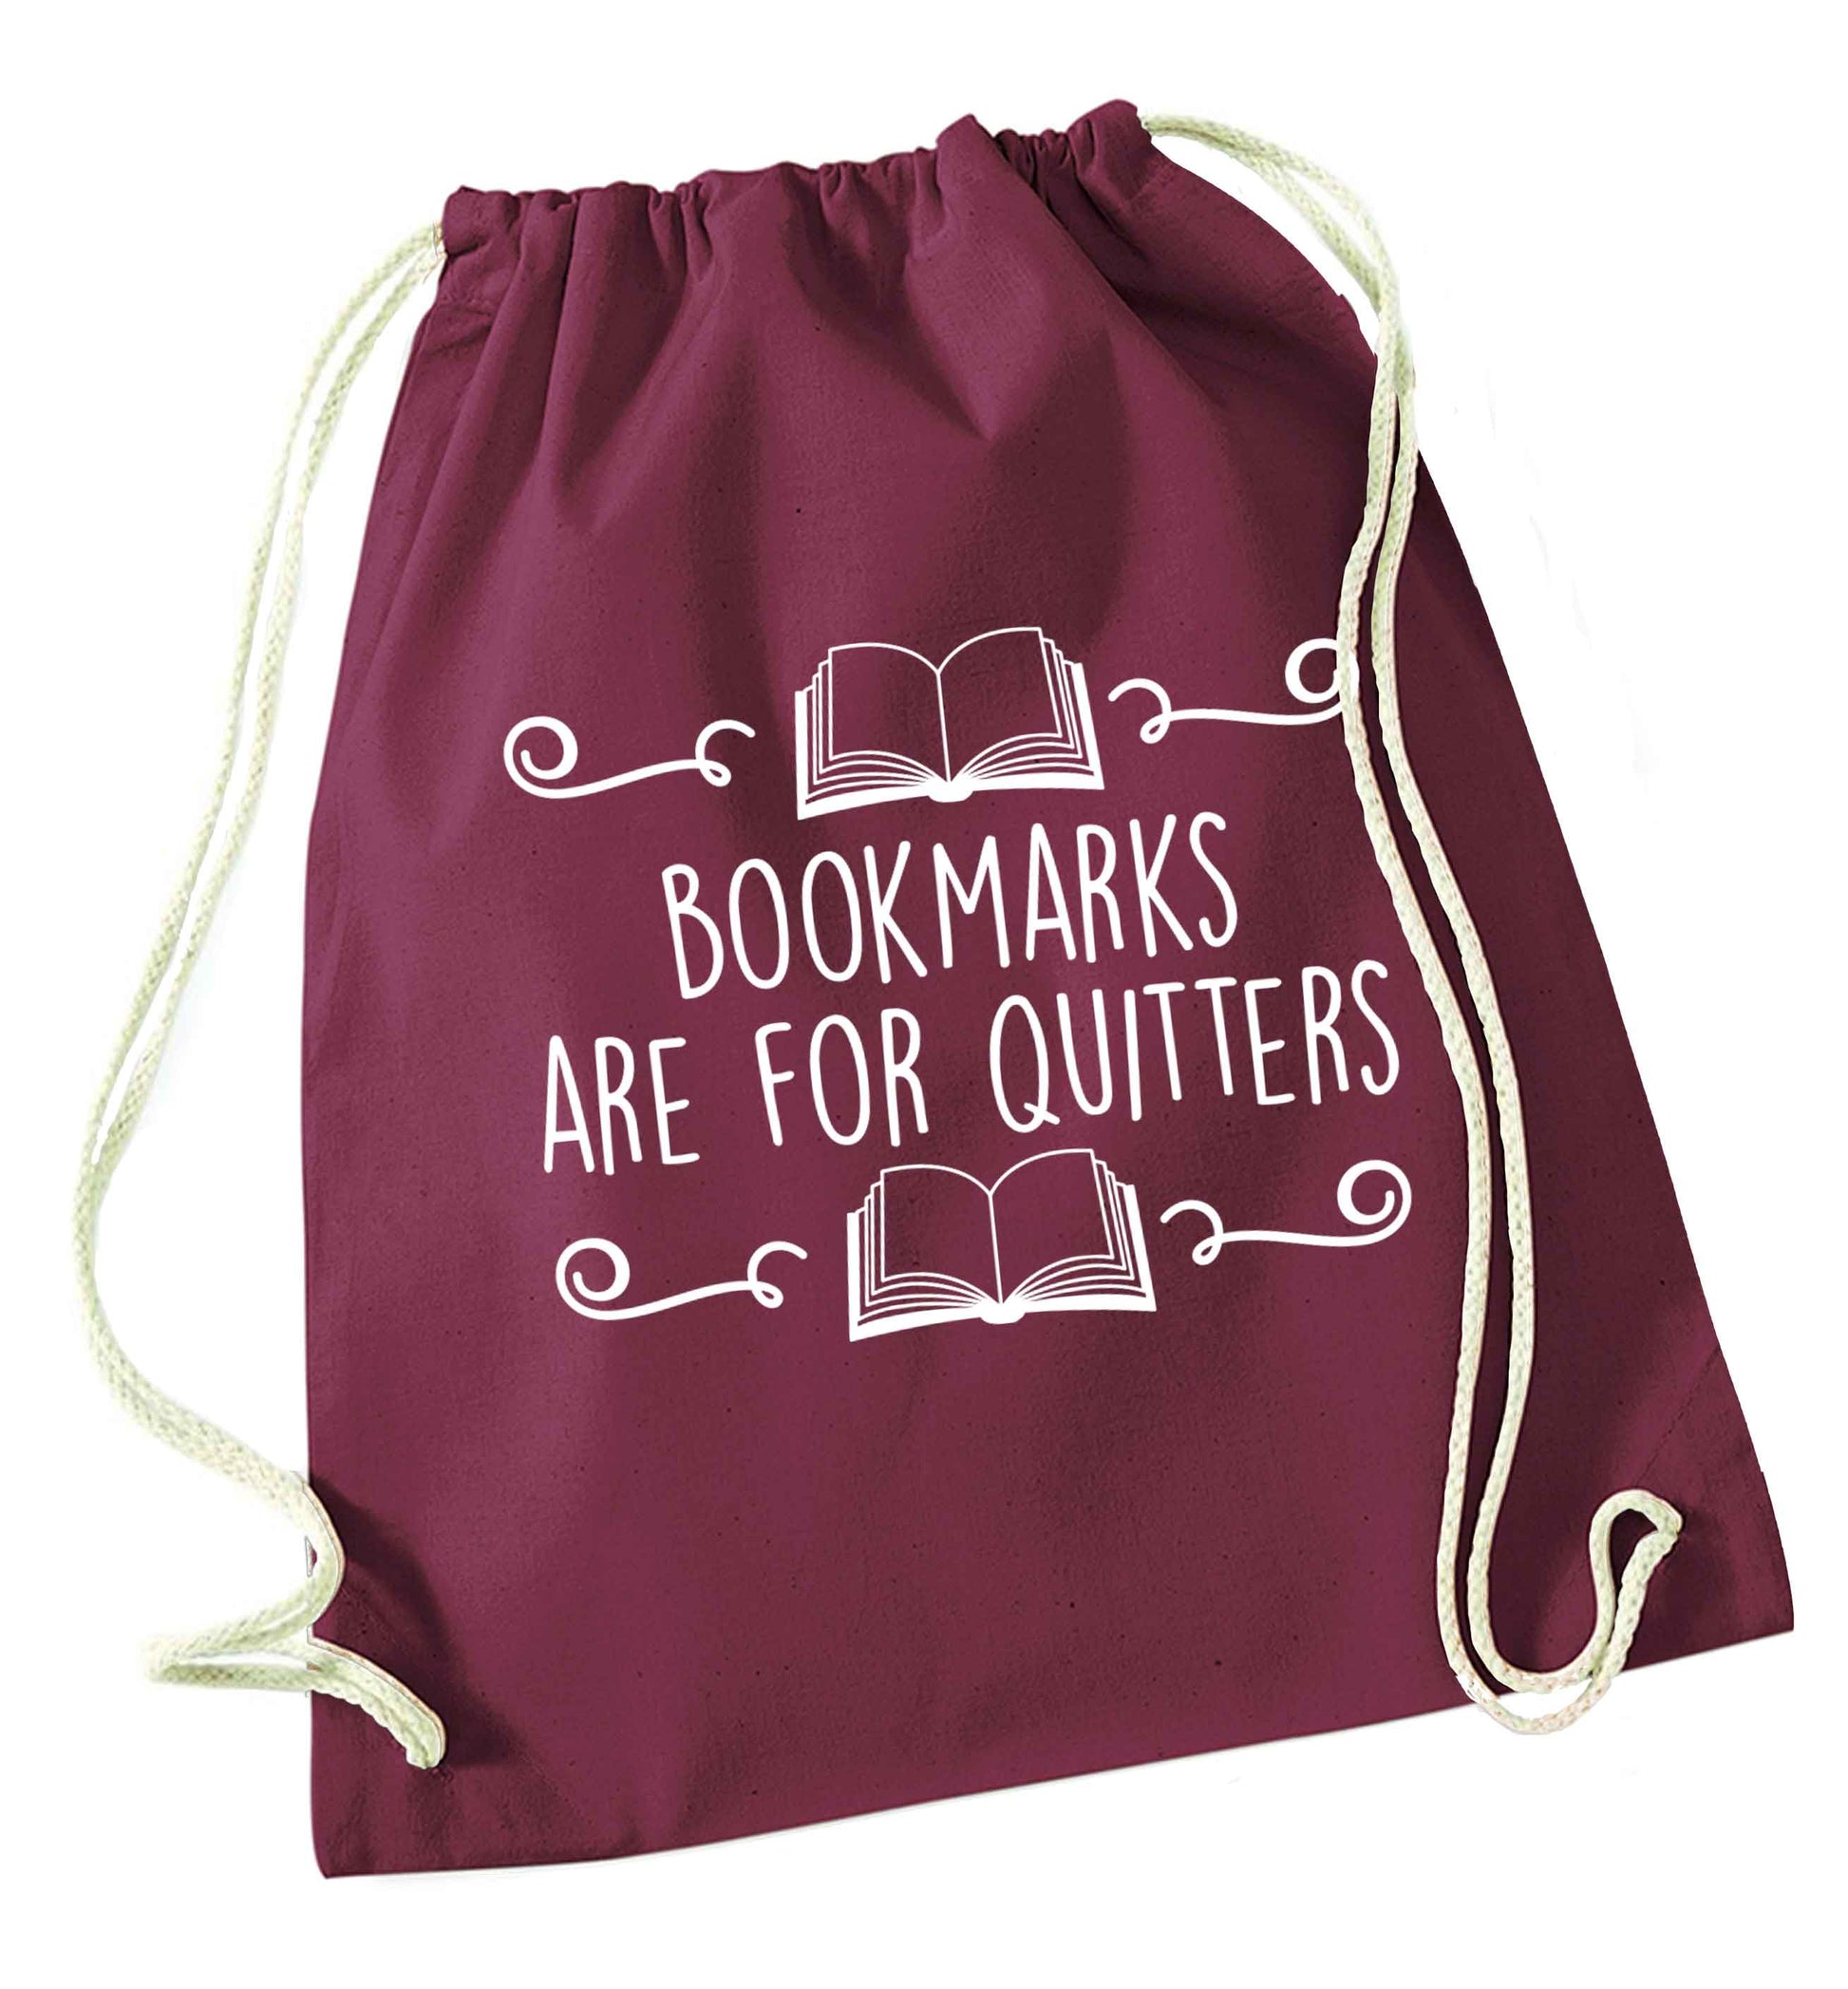 Bookmarks are for quitters maroon drawstring bag